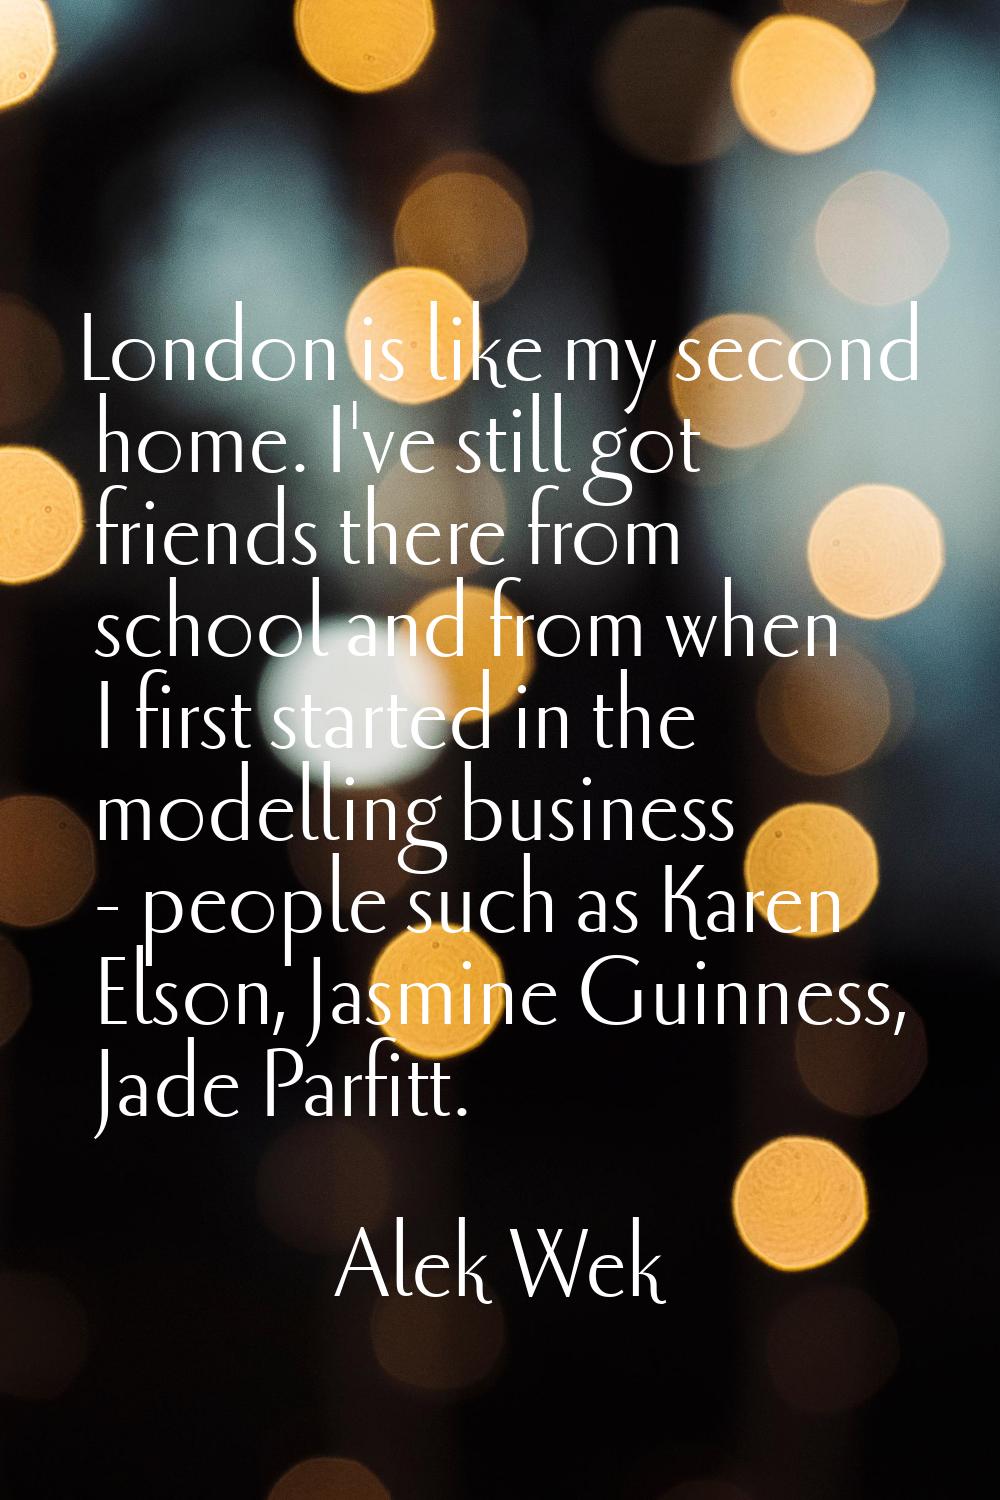 London is like my second home. I've still got friends there from school and from when I first start